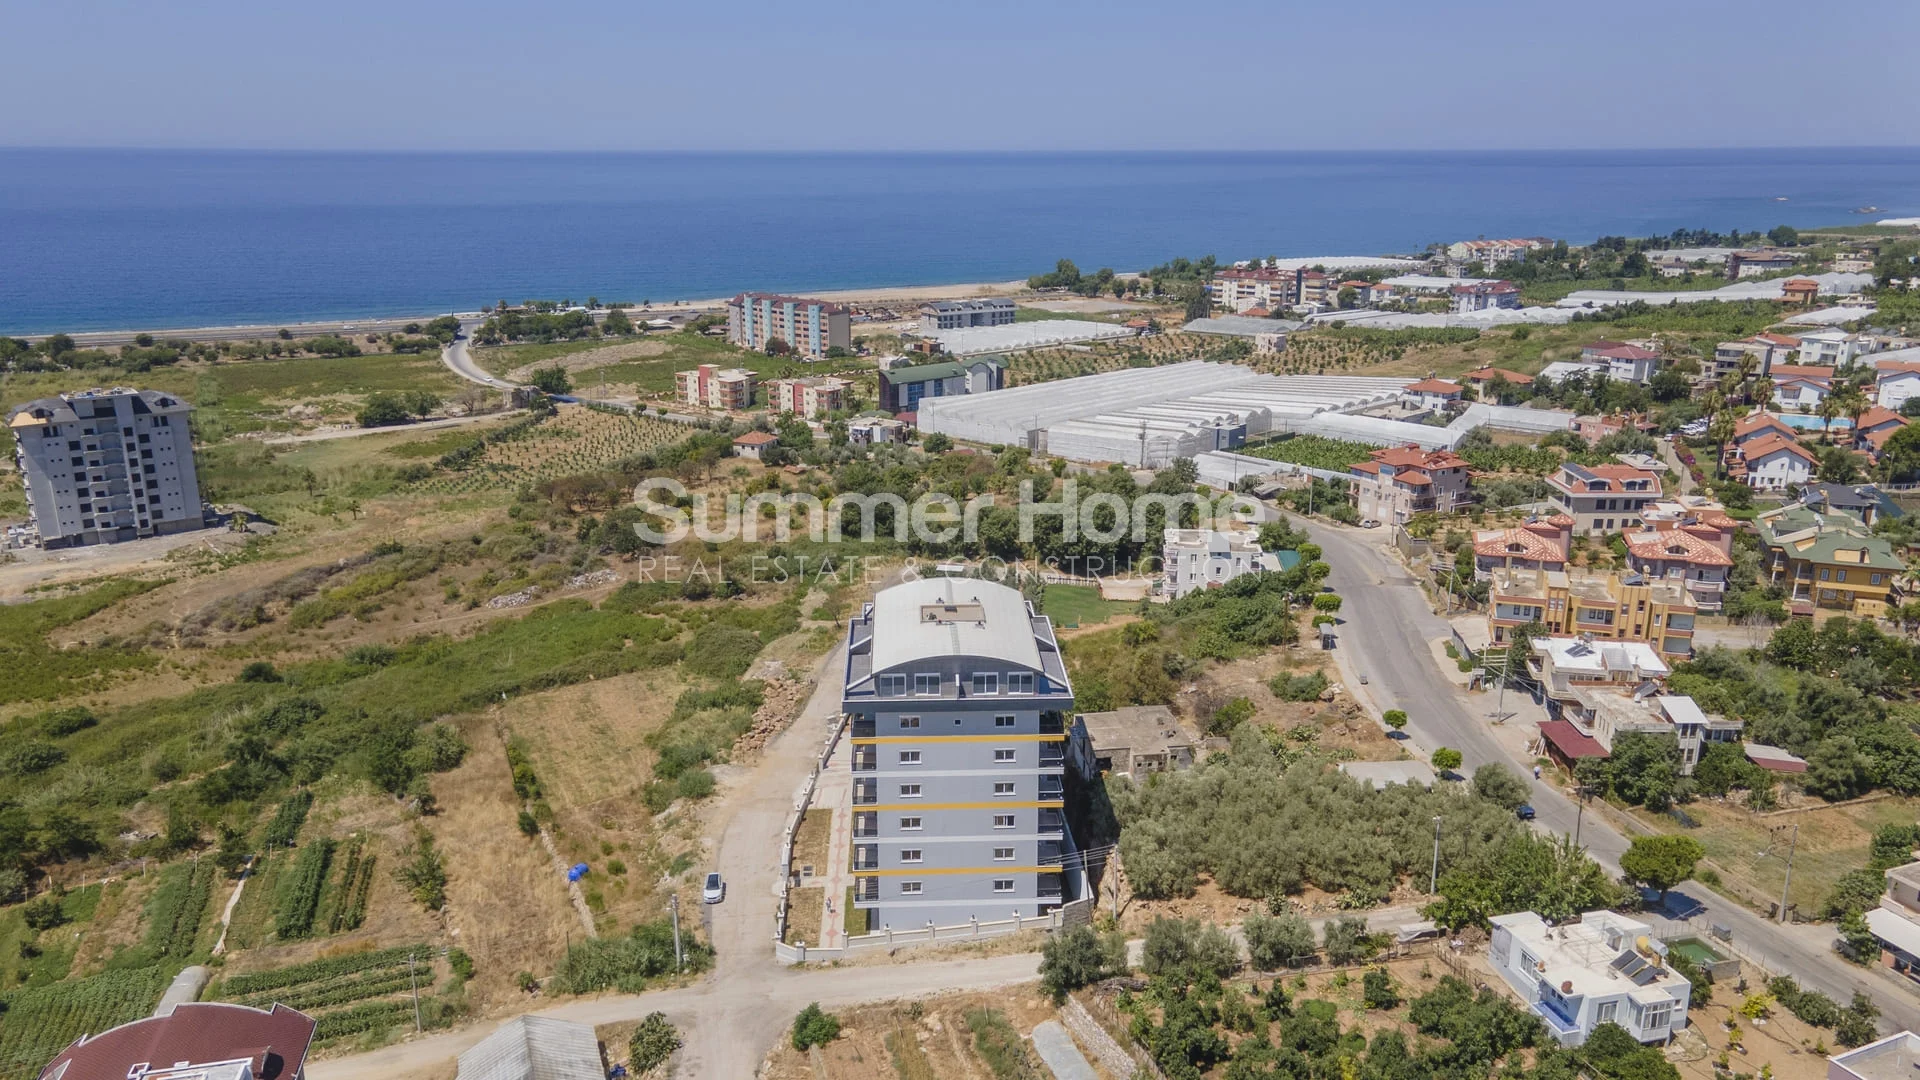 Lovely Sea View Apartments in Demirtas general - 8